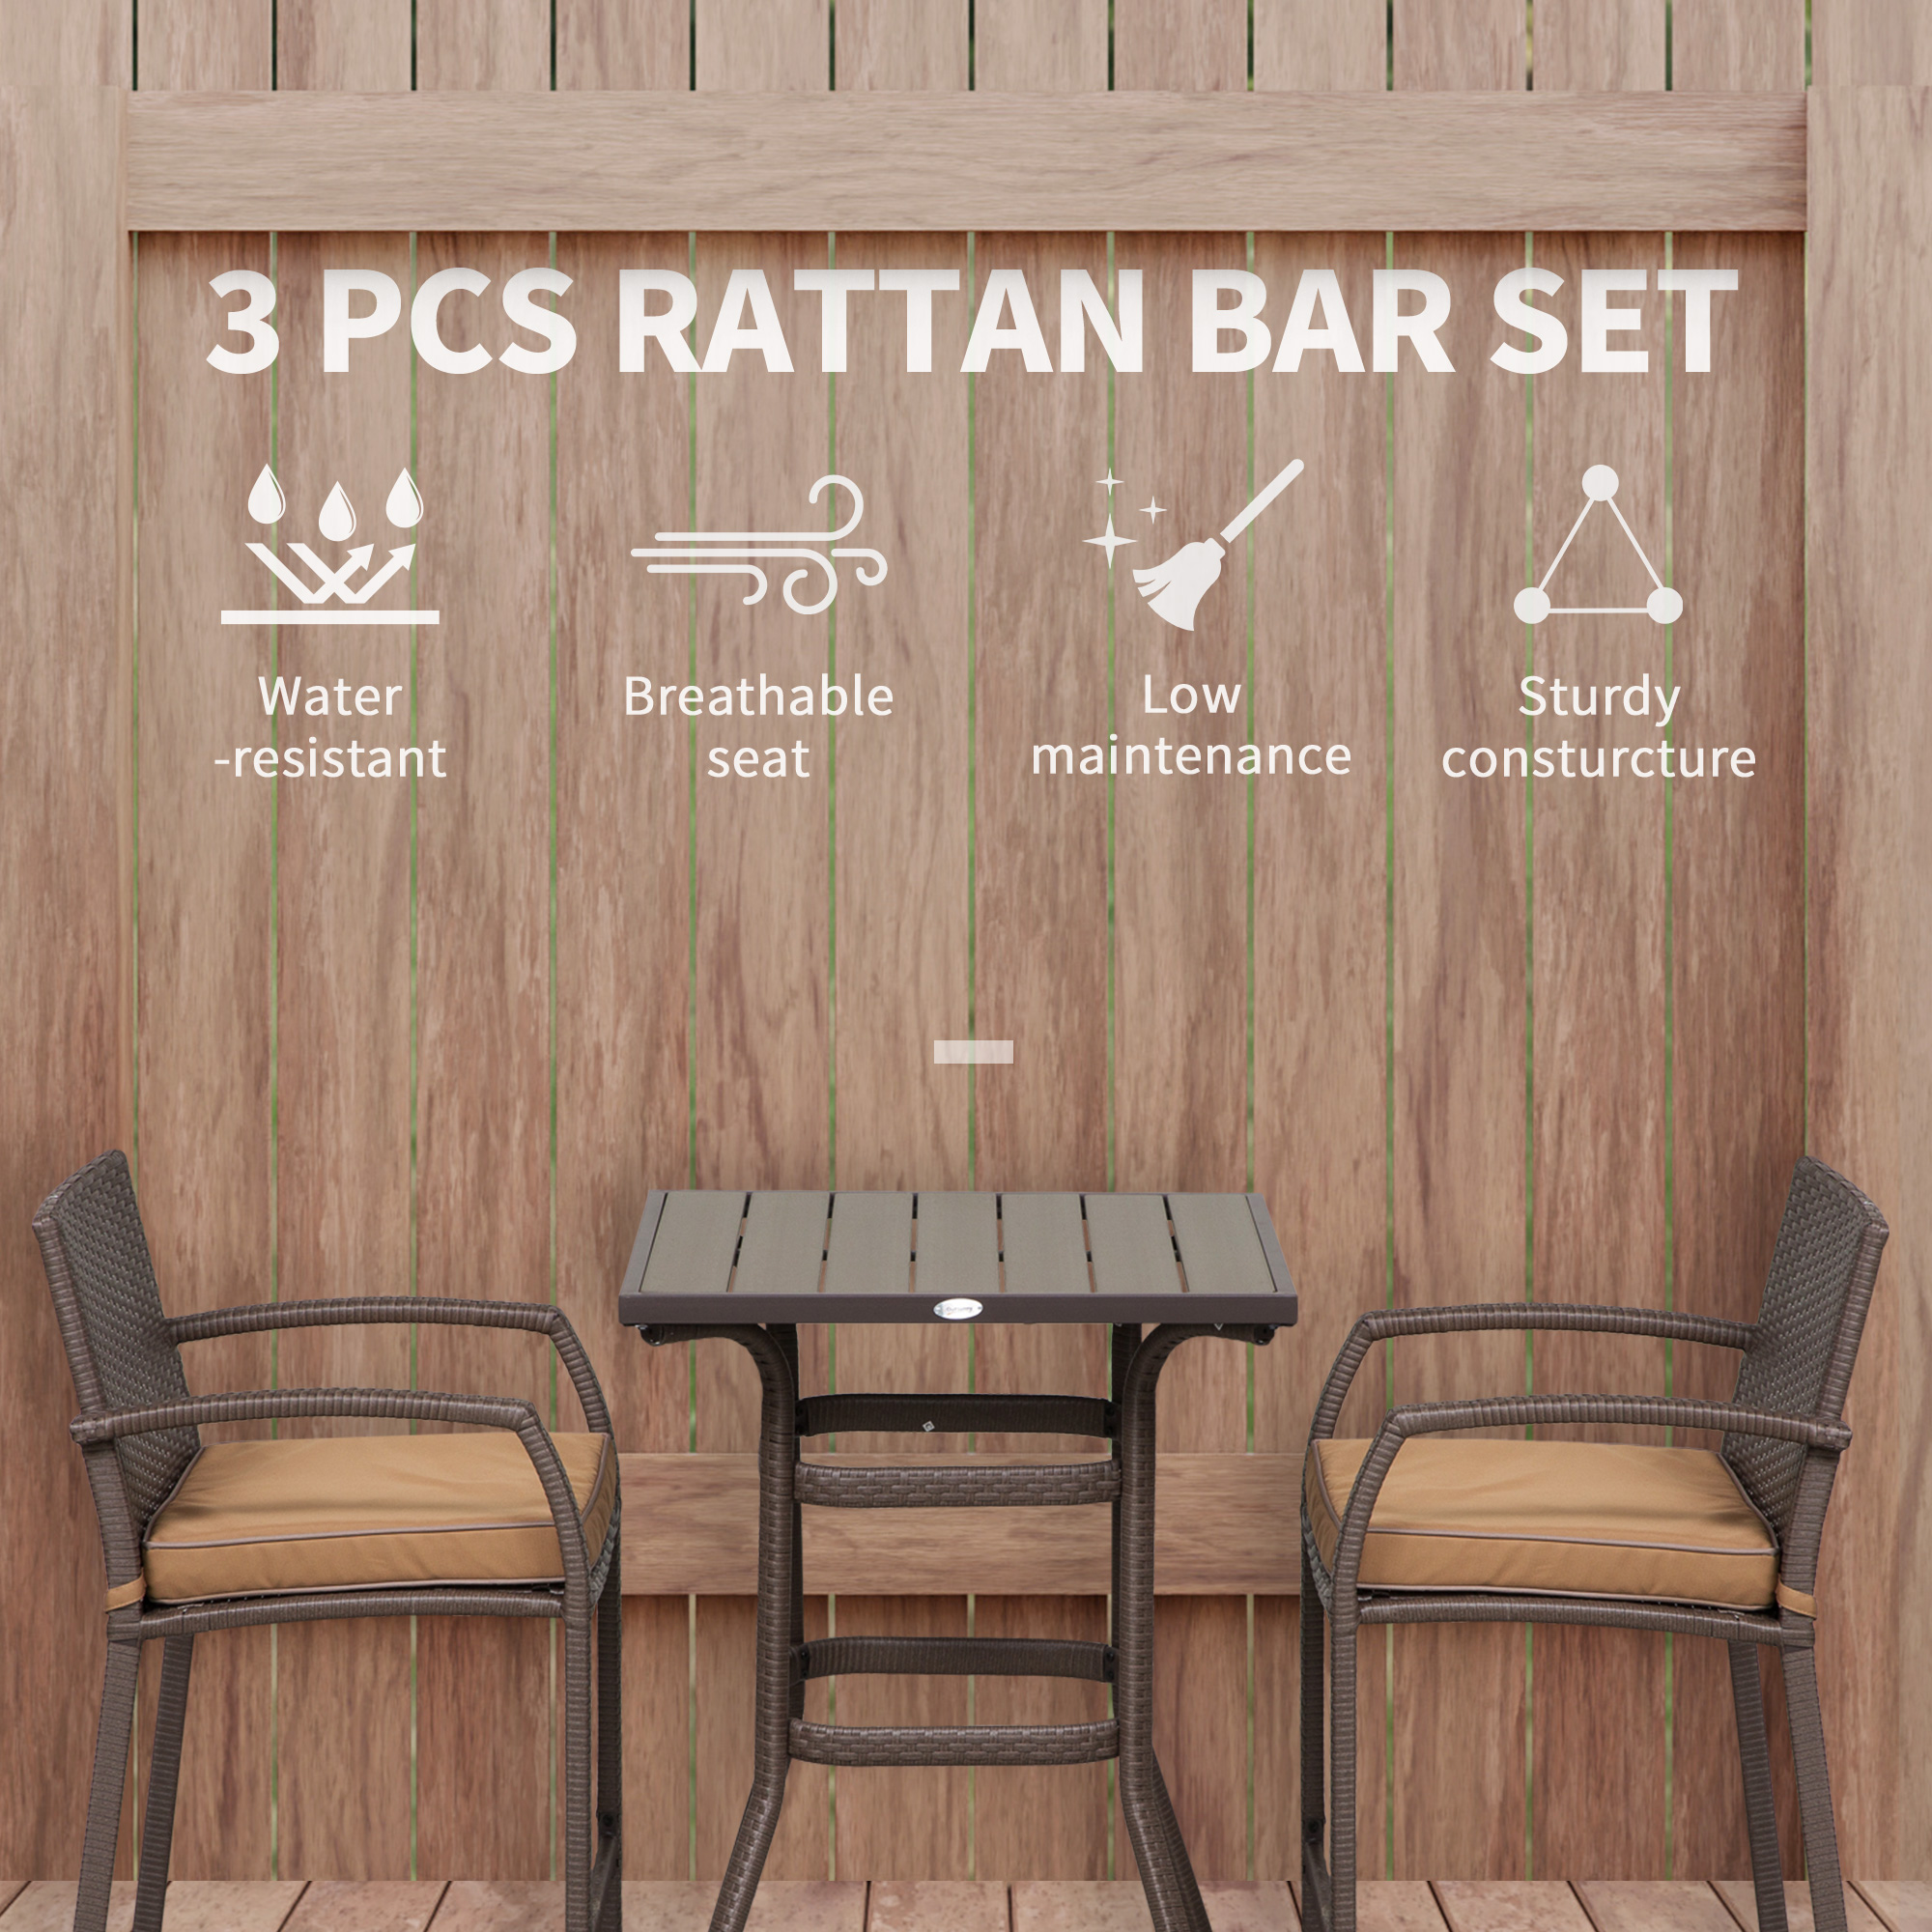 Outsunny 3 PCS Rattan Wicker Bar Set with Wood Grain Top Table and 2 Bar Stools for Outdoor, Patio, Poolside, Garden, Brown - image 3 of 9